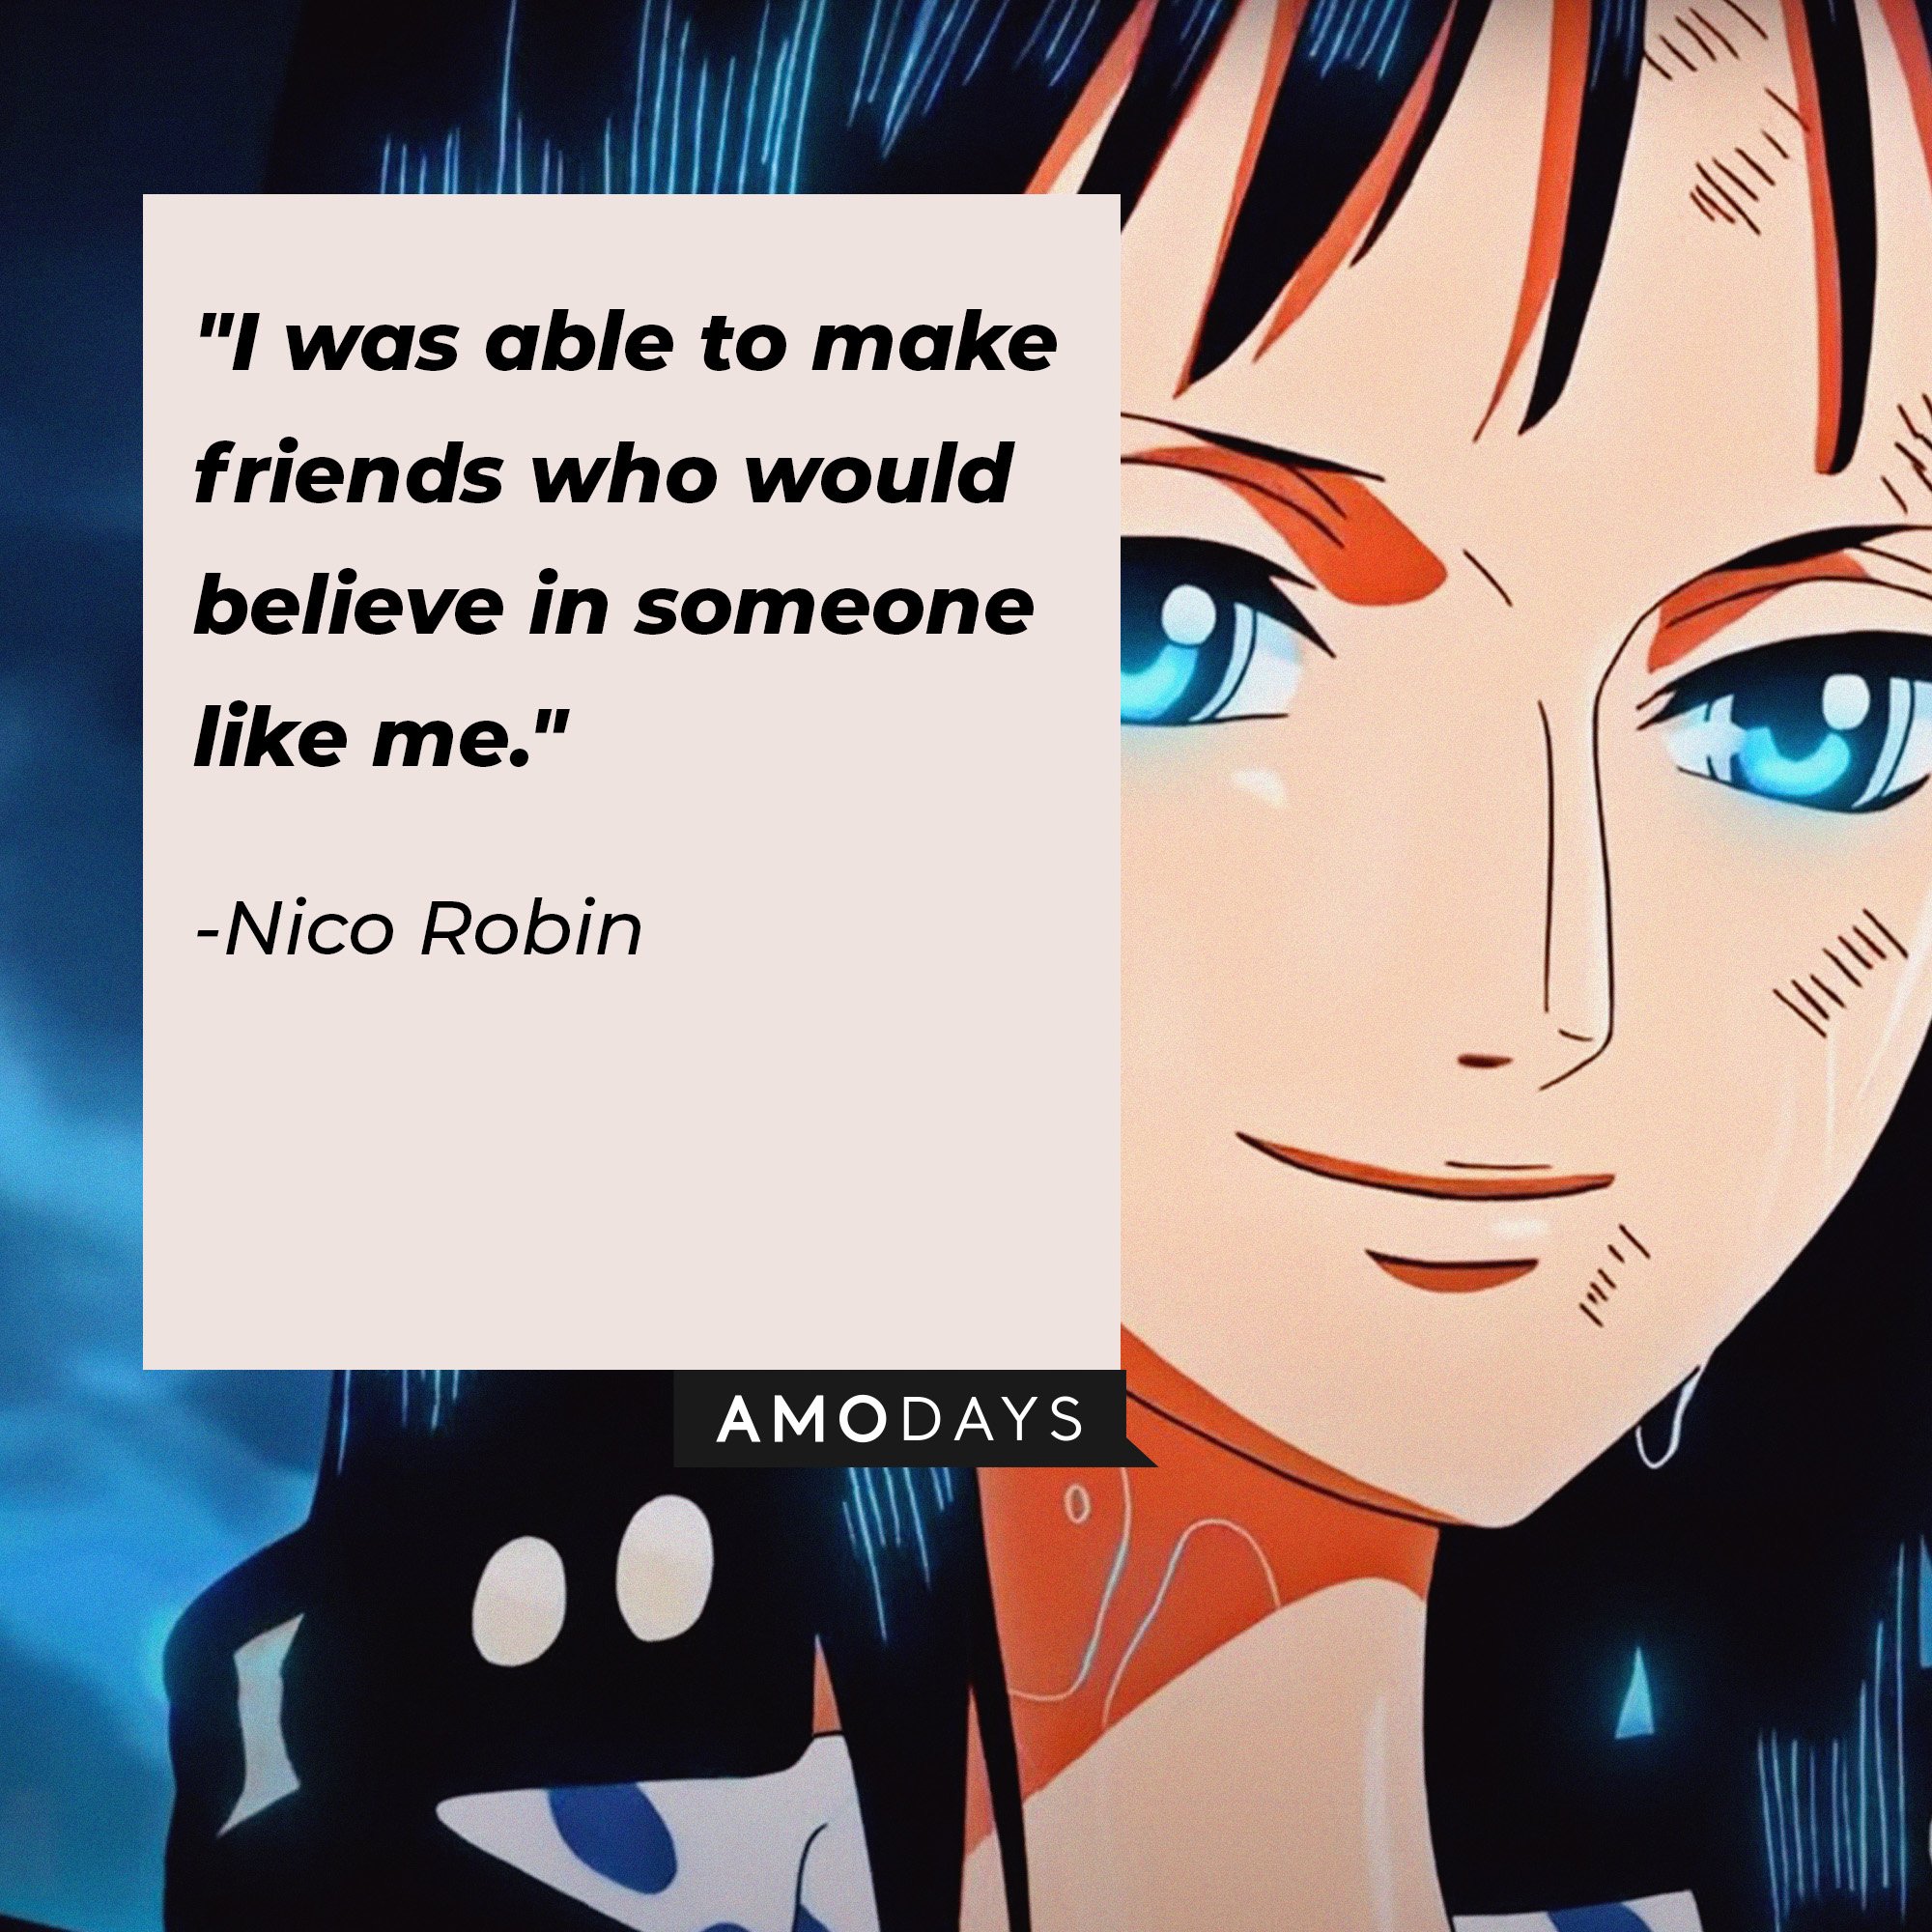 Nico Robin’s quote: "I was able to make friends who would believe in someone like me."  | Image: AmoDays